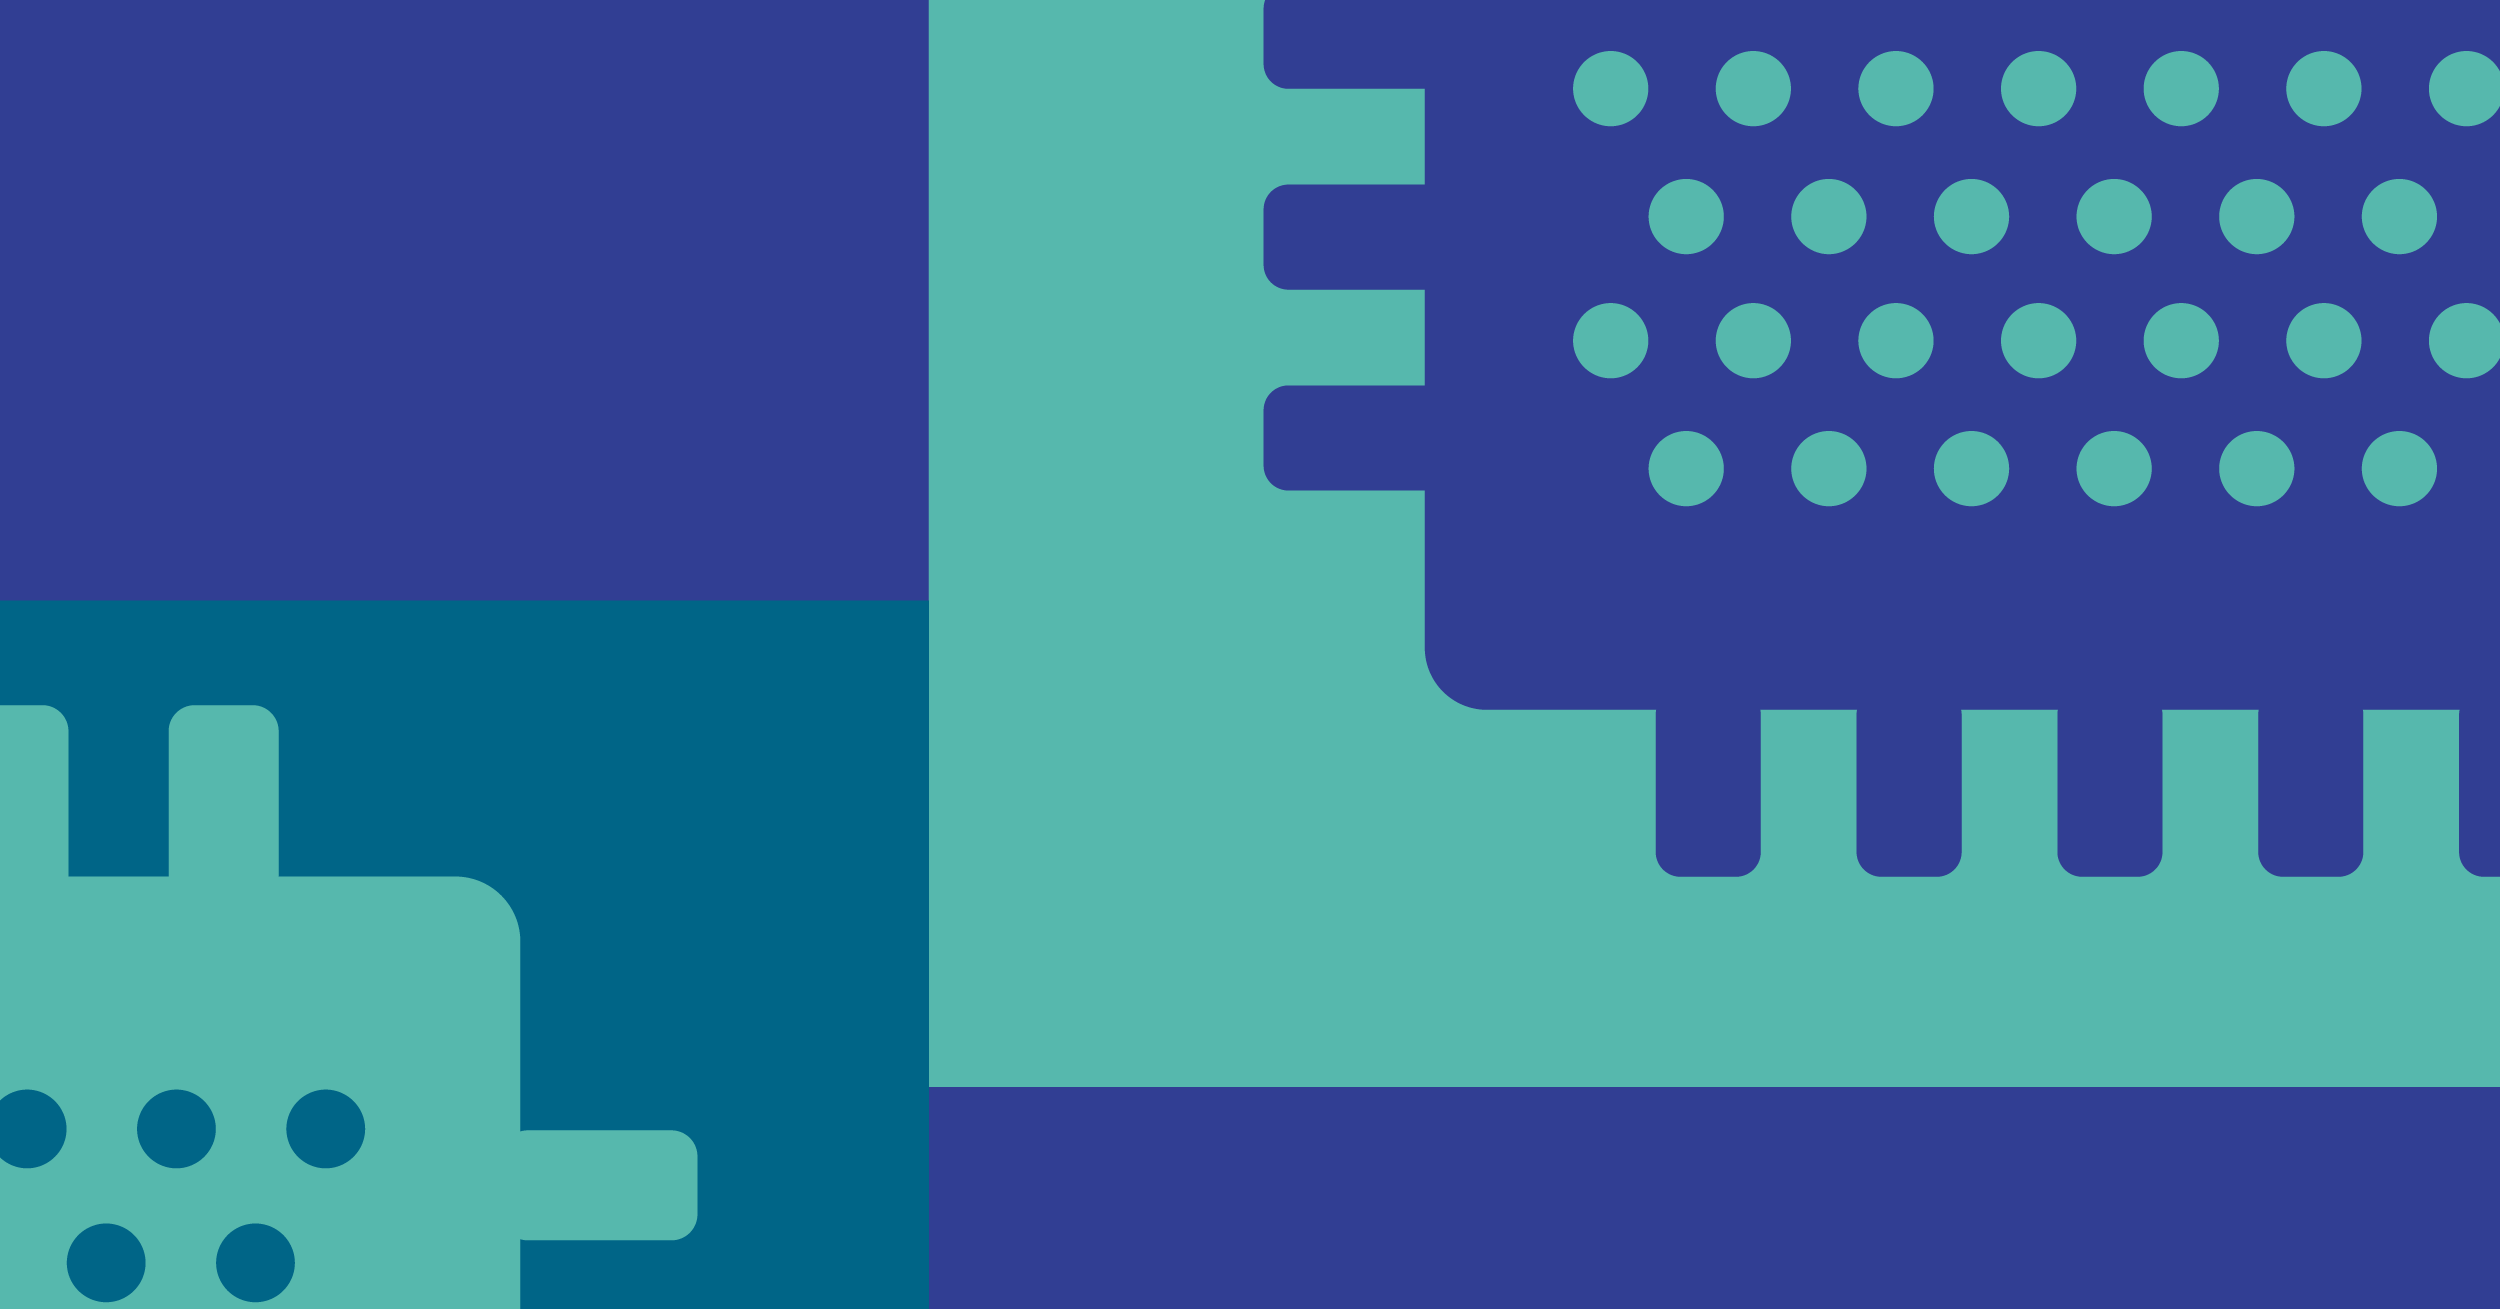 Illustration of part of a dark blue semiconductor outlined in teal and part of a teal semiconductor outlined in dark teal in front of a dark blue background depicting the semiconductor industry